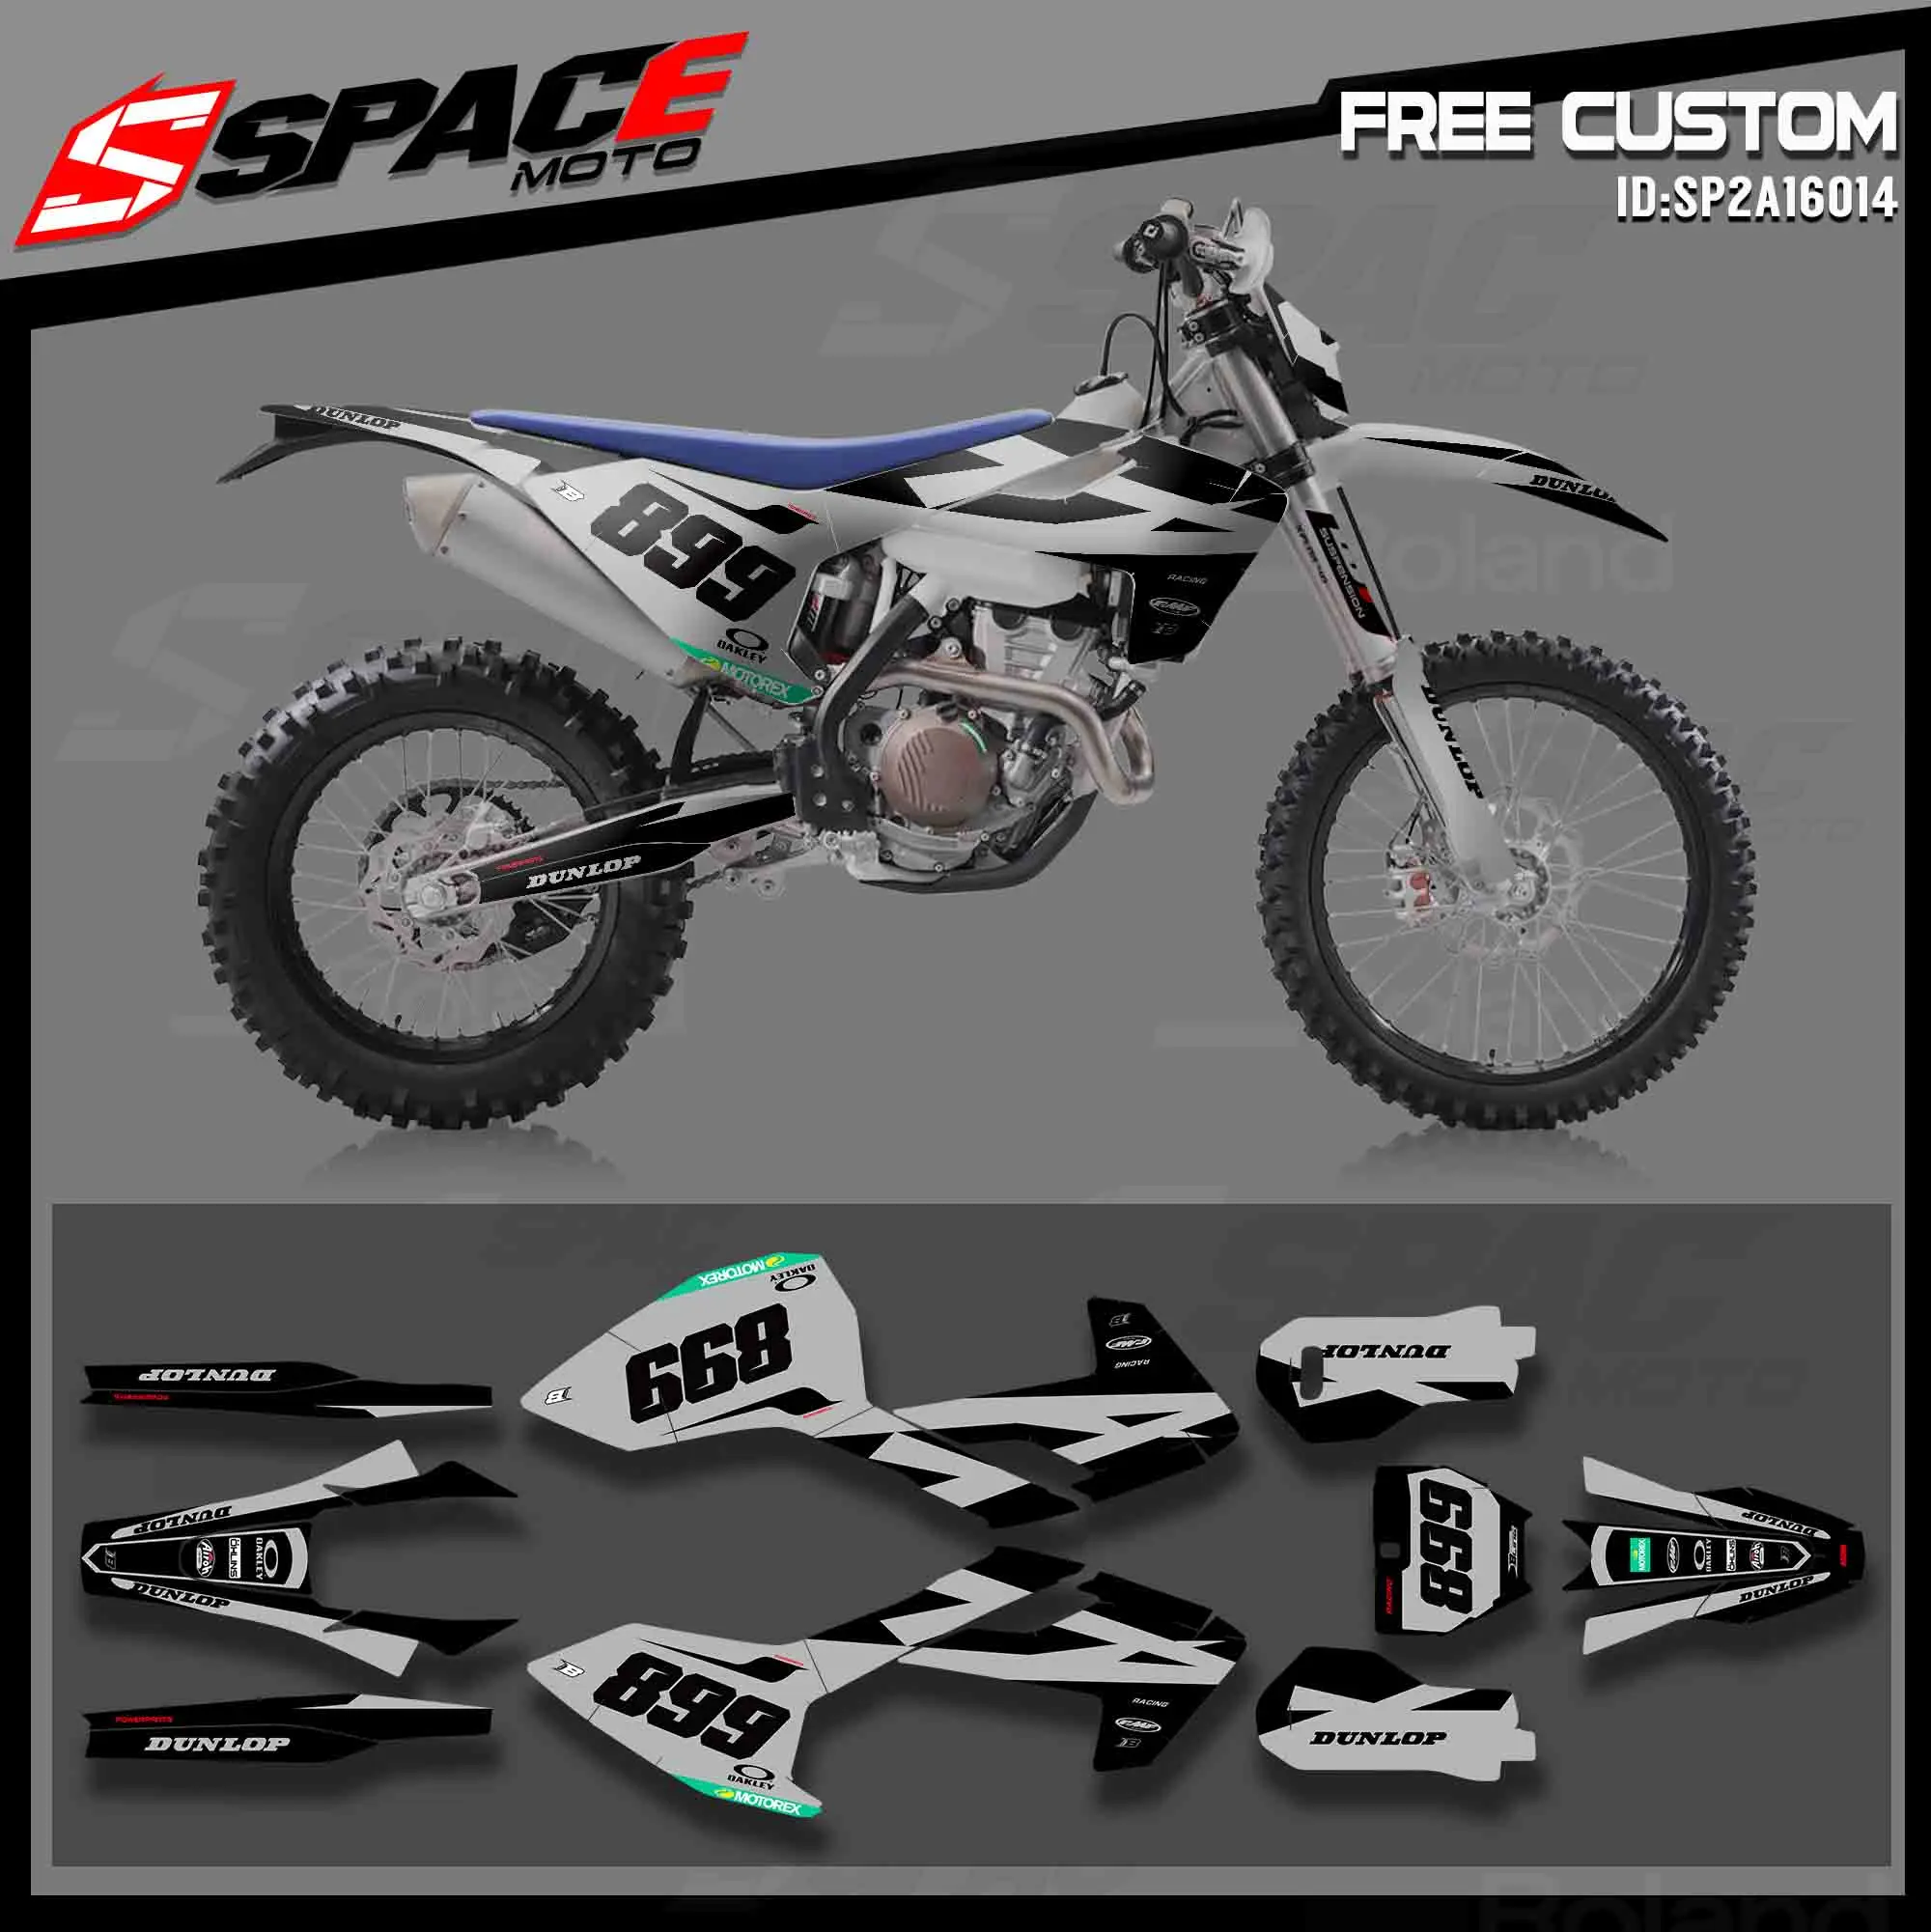 

SPACEMOTO Motorcycle Team Graphic Decal & Sticker Kit For Husqvarna TC FC TX FX FS2016-2018 TE FE 2017-2019 Motocross Racing